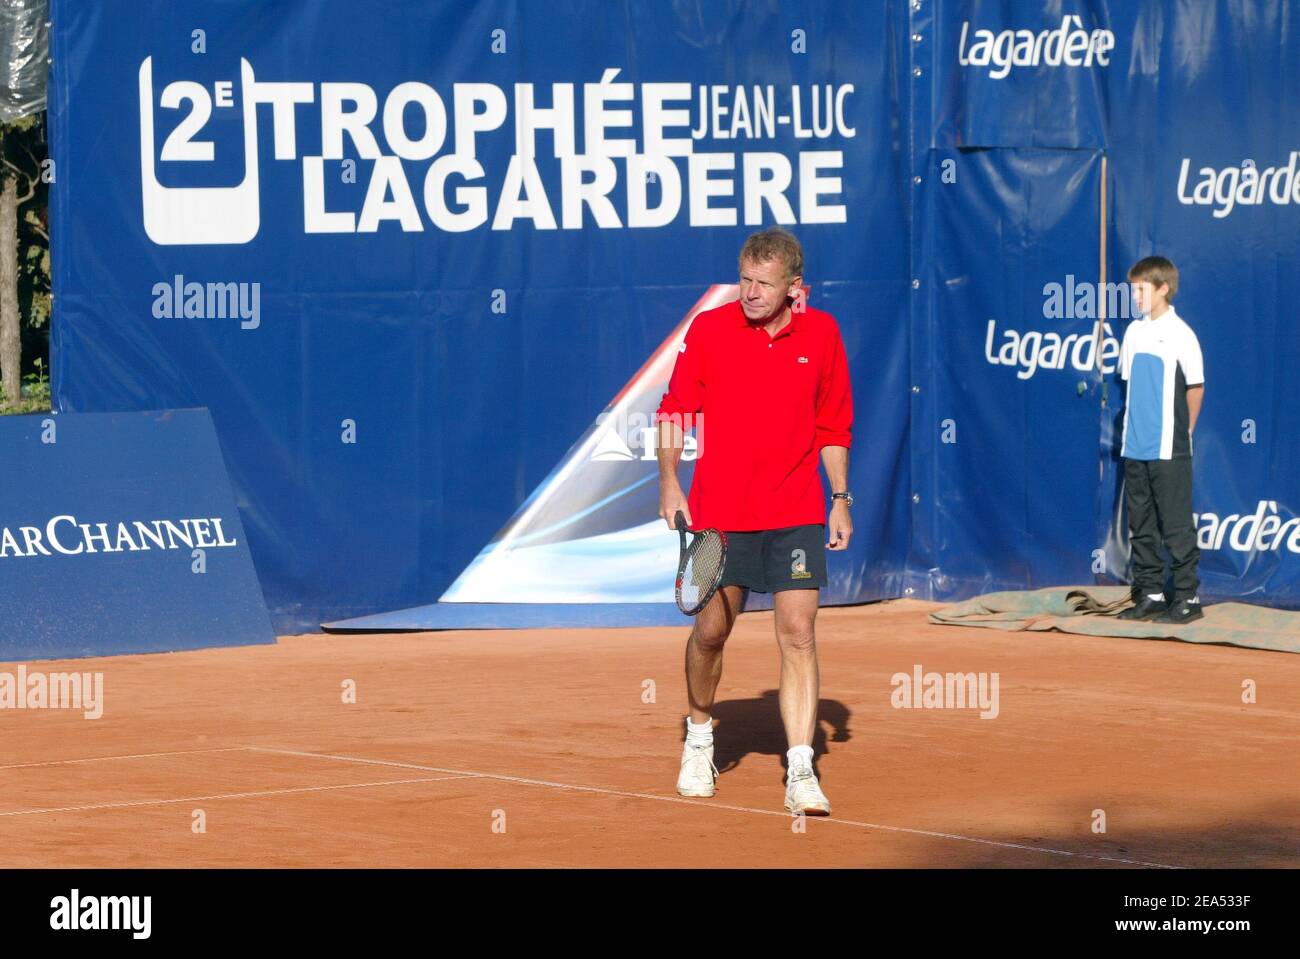 French TV anchor Patrick Poivre d'Arvor plays tennis on second Lagardere  Tournament in Paris, France on September 17, 2005. Photo by Medhi  Taamallah/ABACAPRESS.COM Stock Photo - Alamy